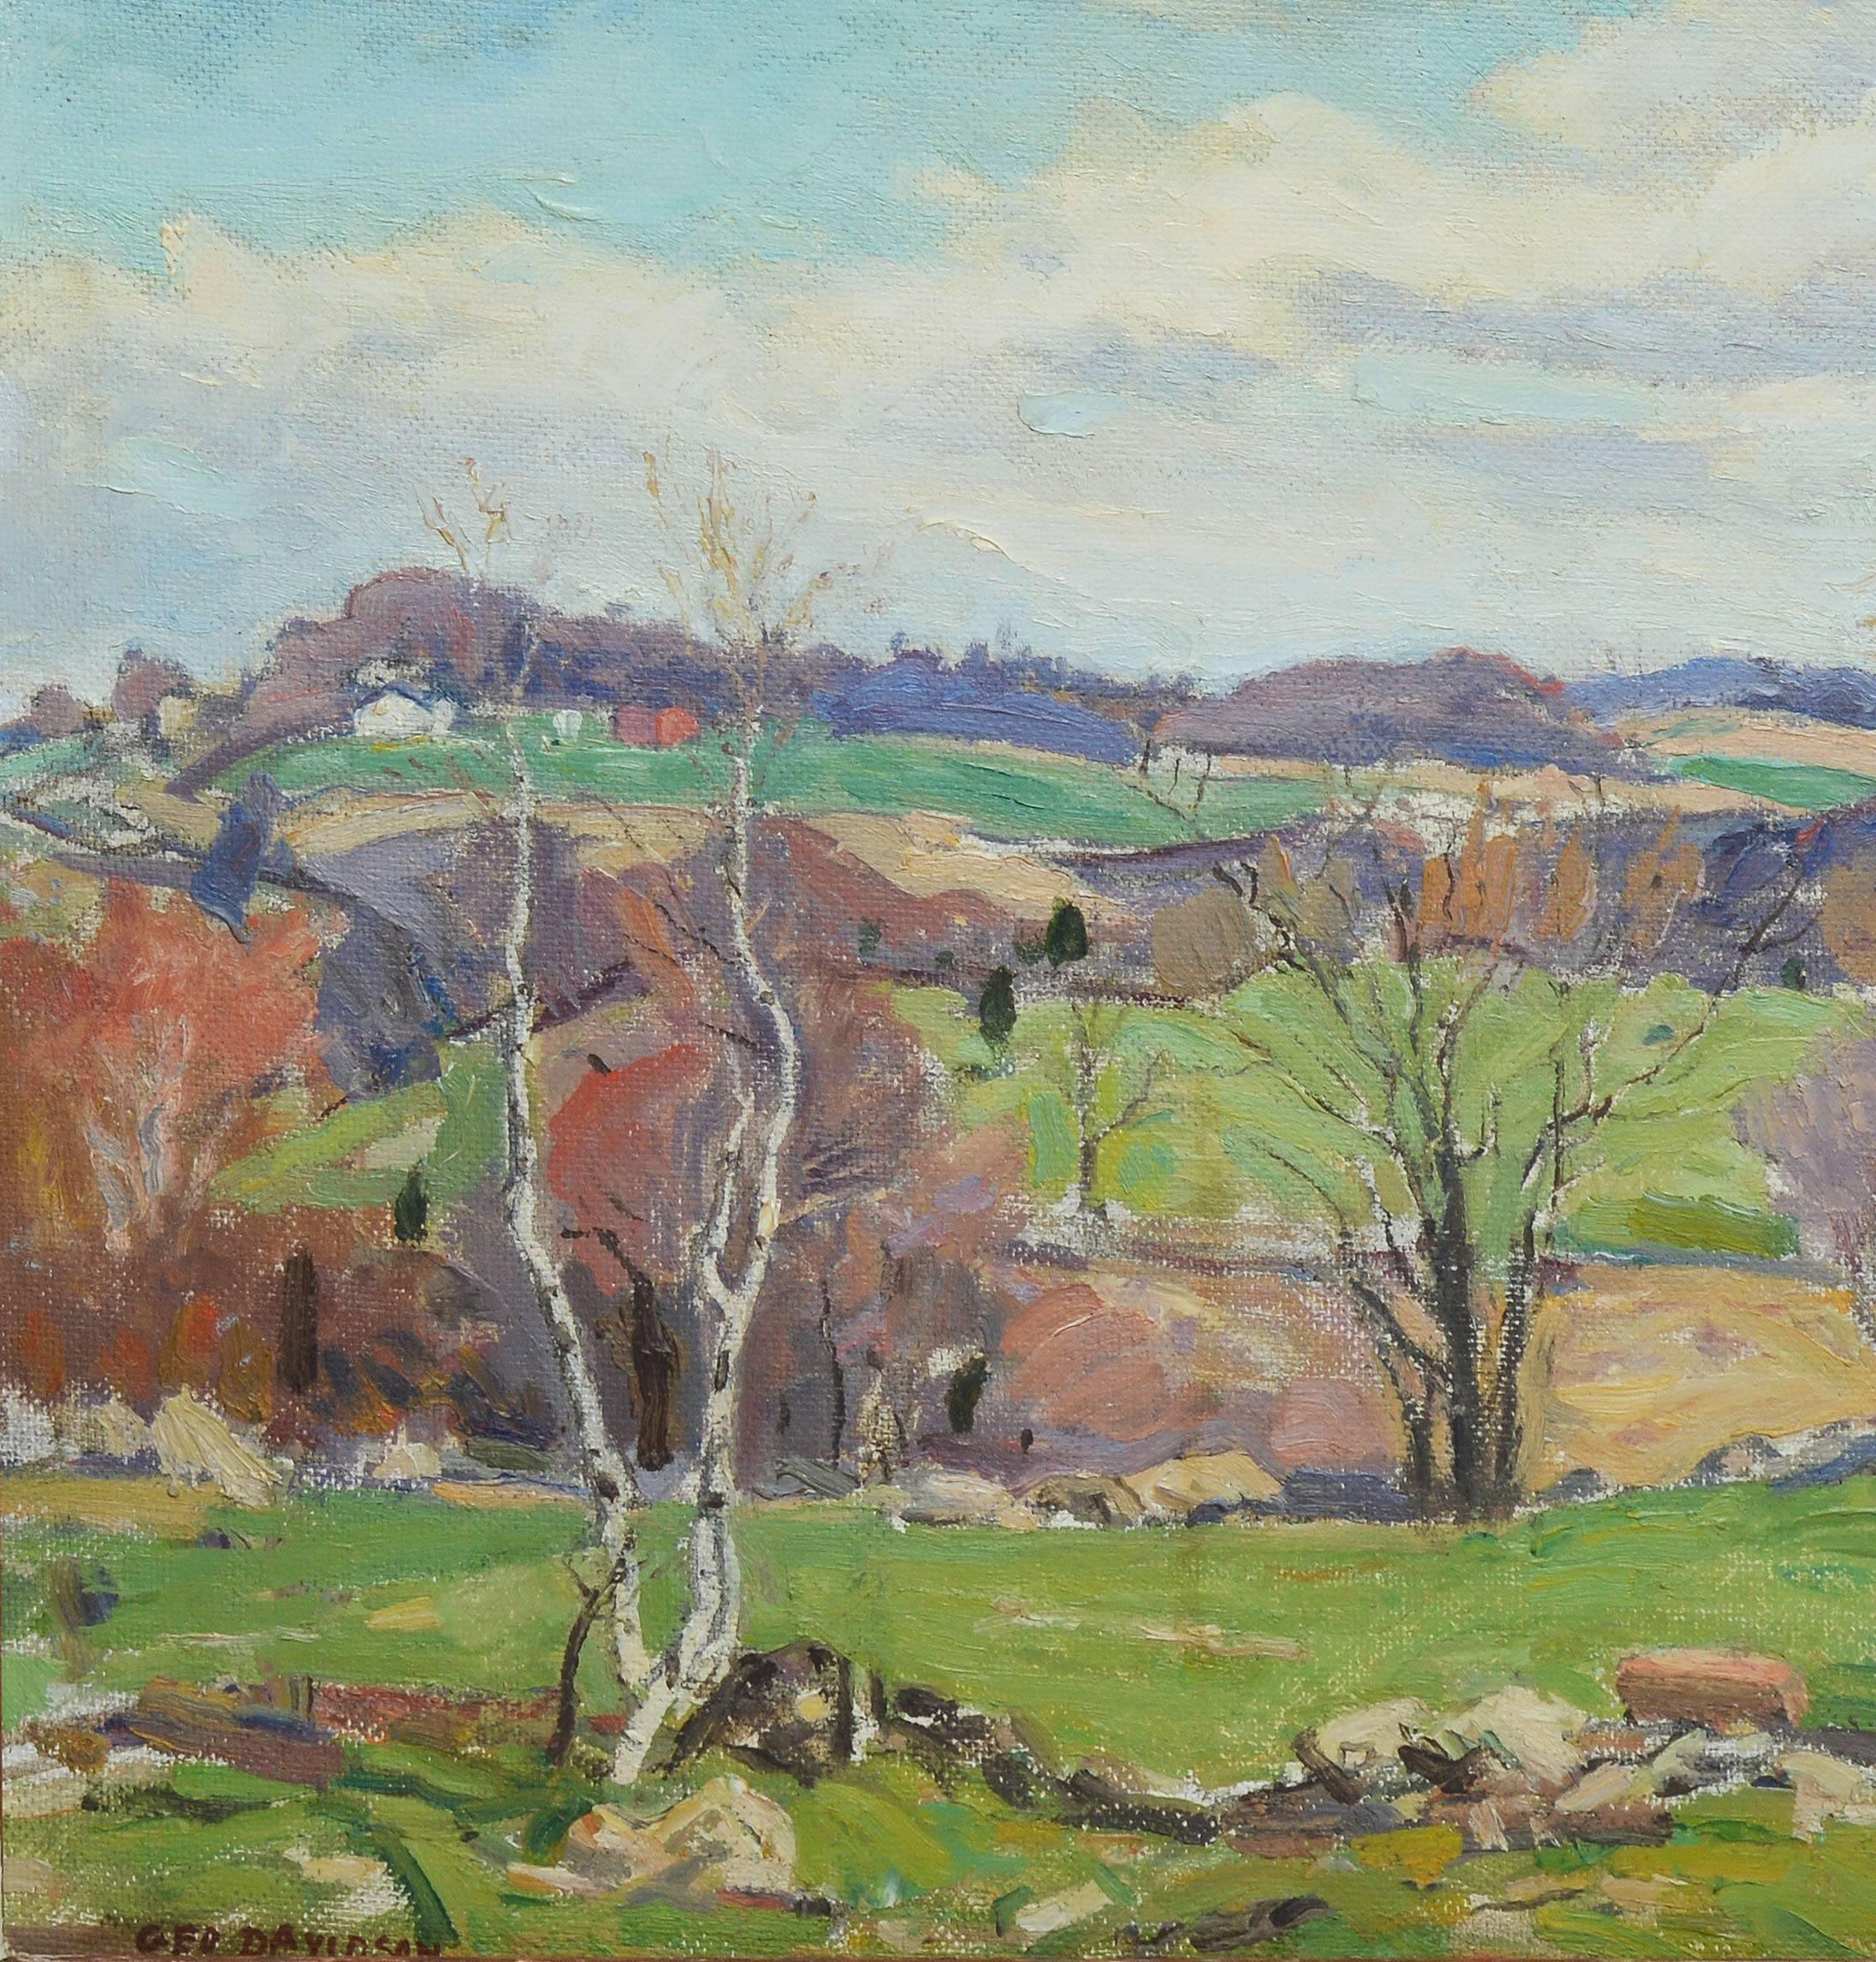 Fall Landscape by George Davidson  - Impressionist Painting by George Davidson b.1889